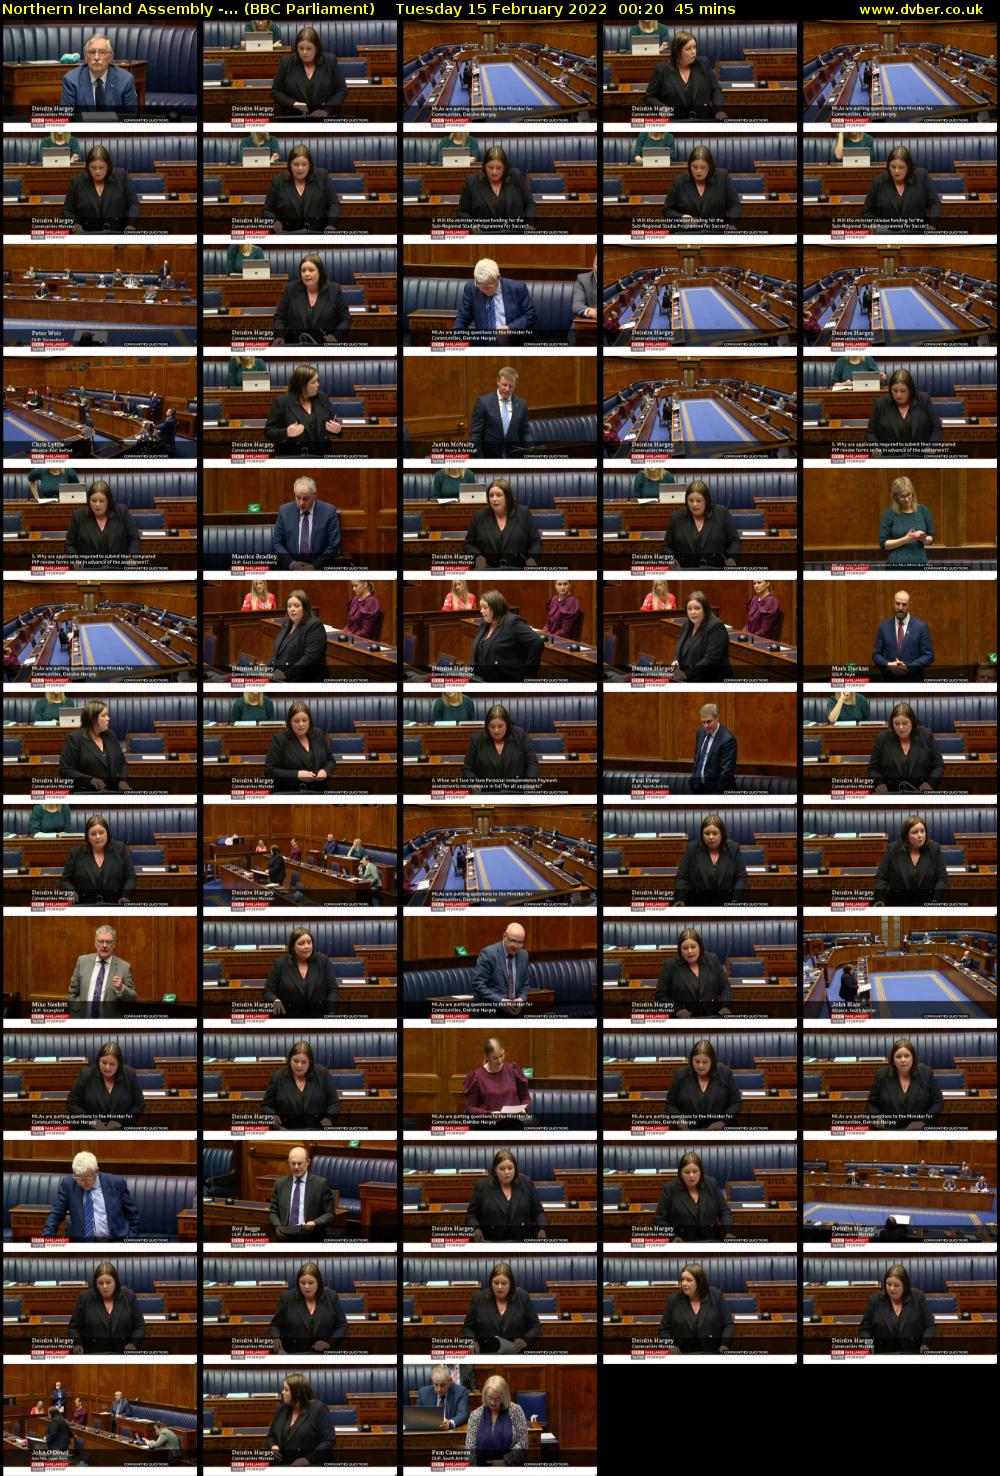 Northern Ireland Assembly -... (BBC Parliament) Tuesday 15 February 2022 00:20 - 01:05